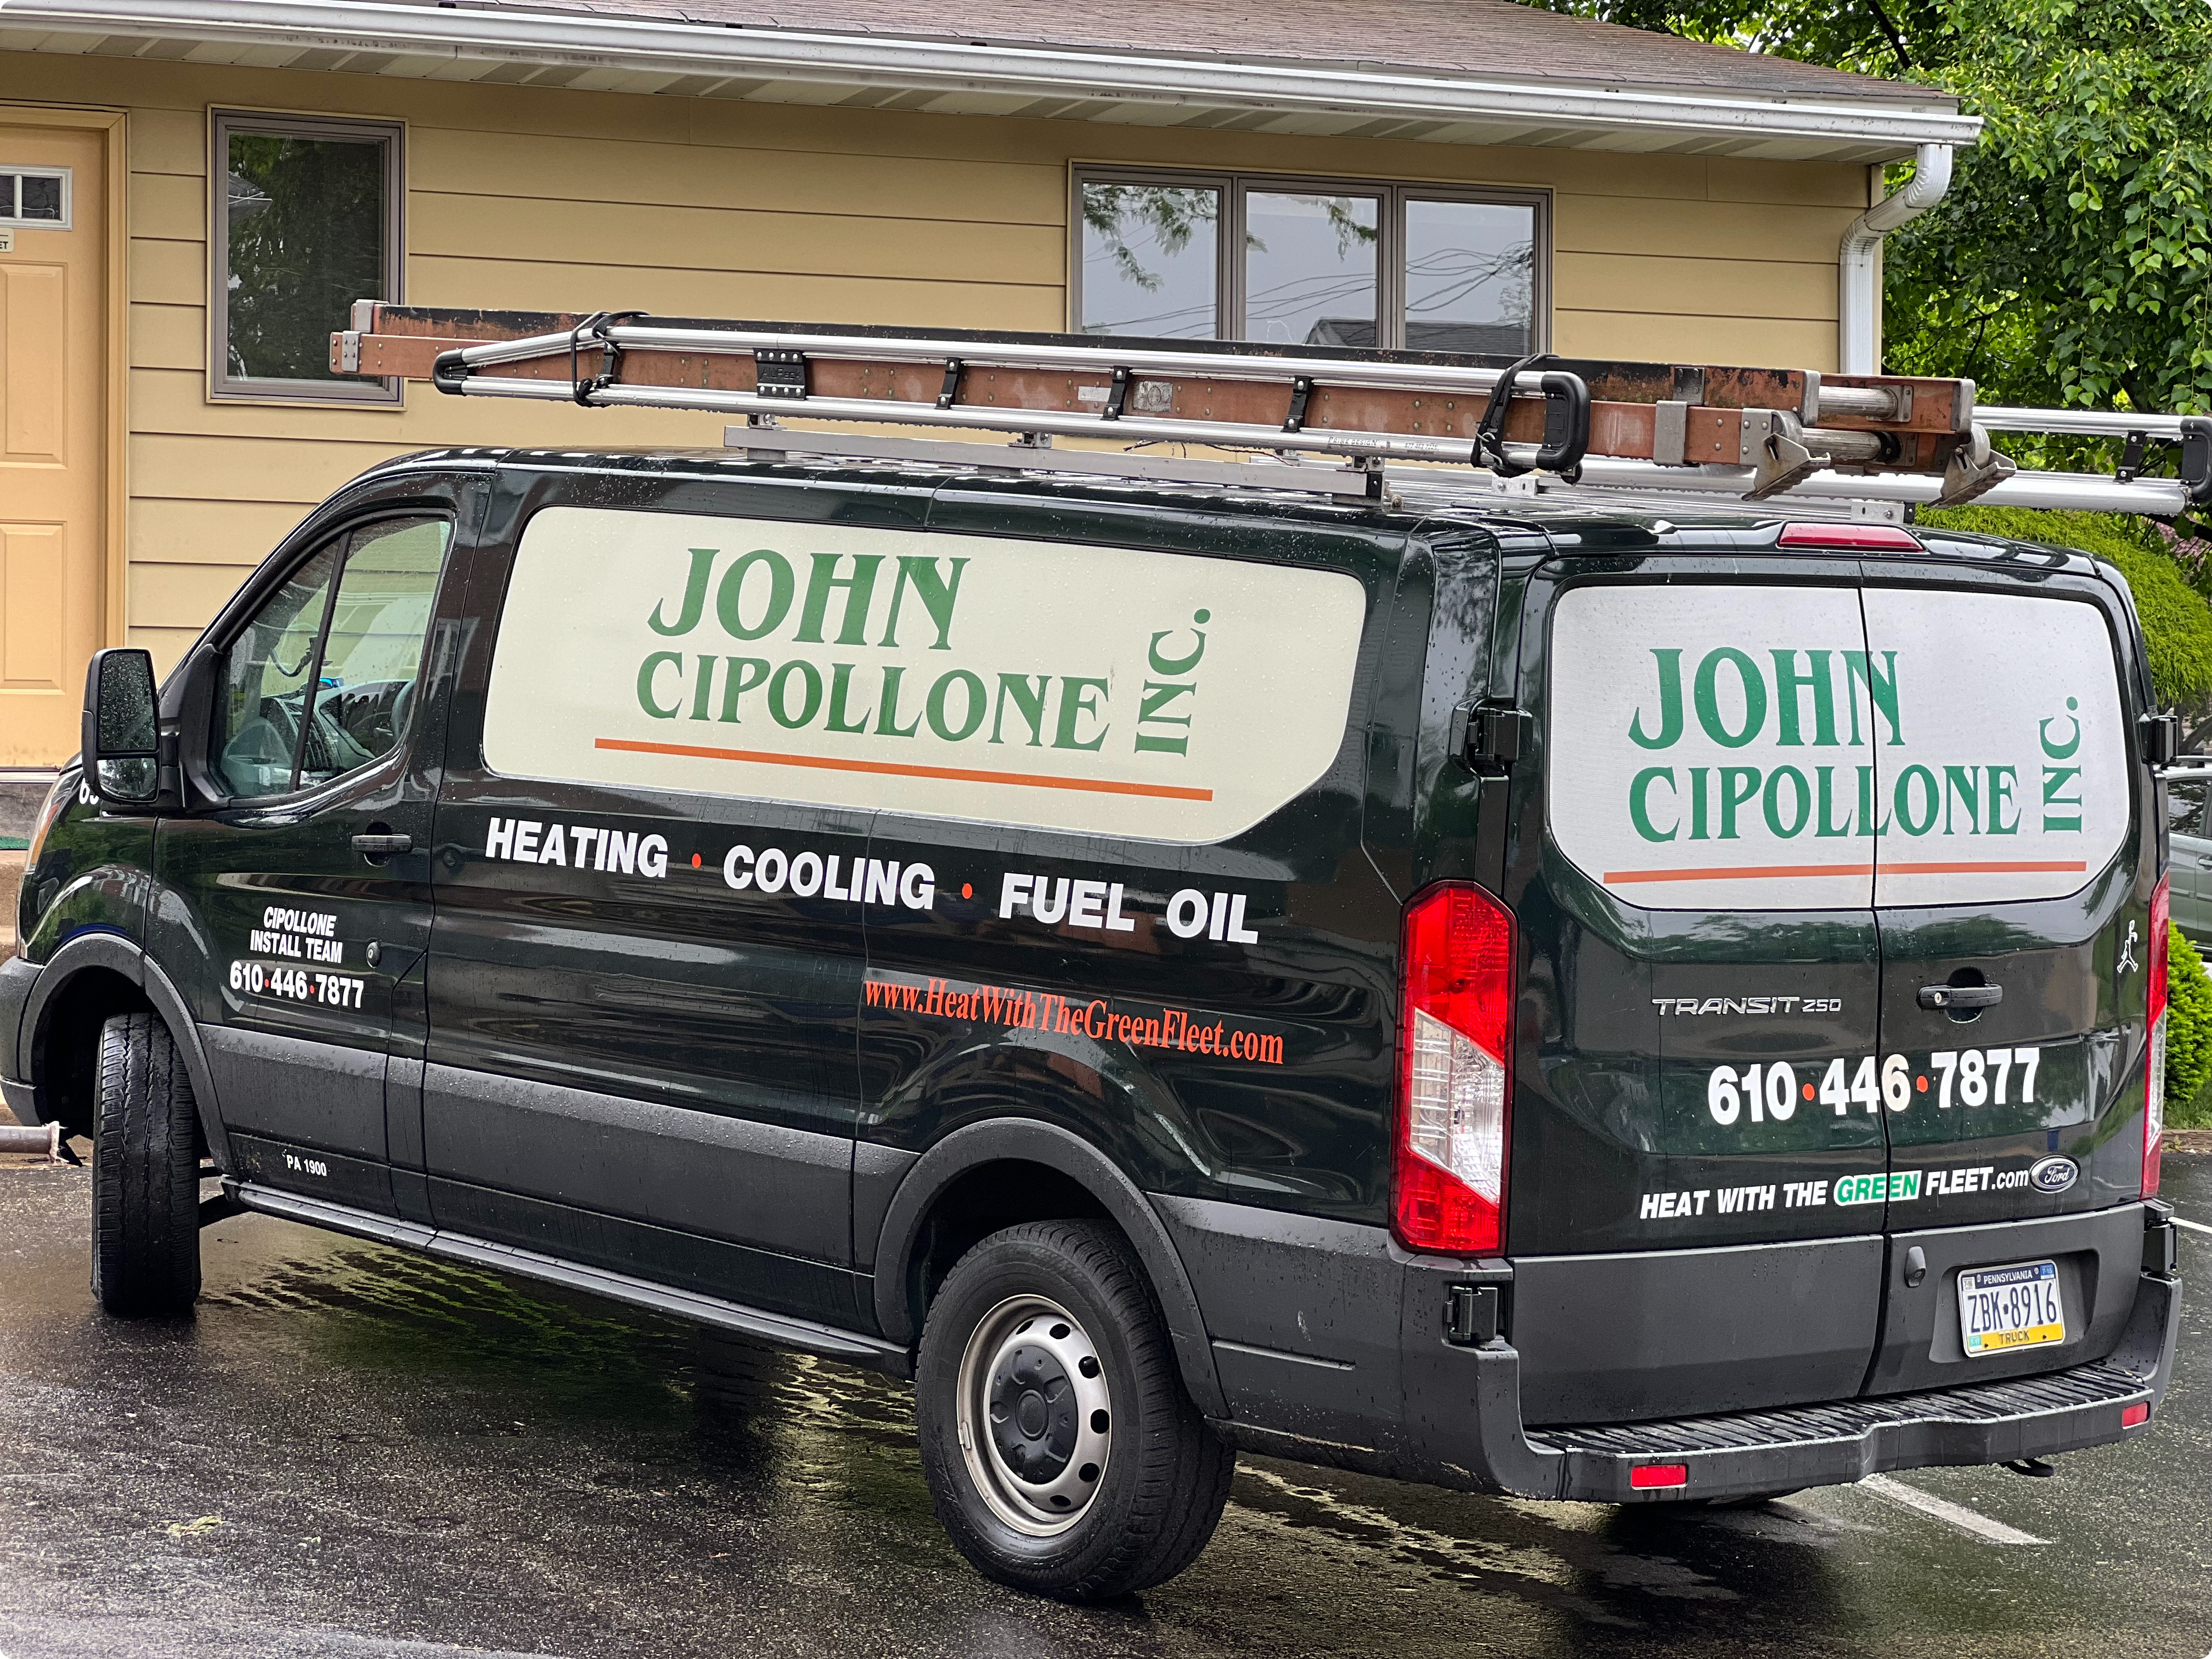 John Cipollone Inc Can Help With Your HVAC Upgrades